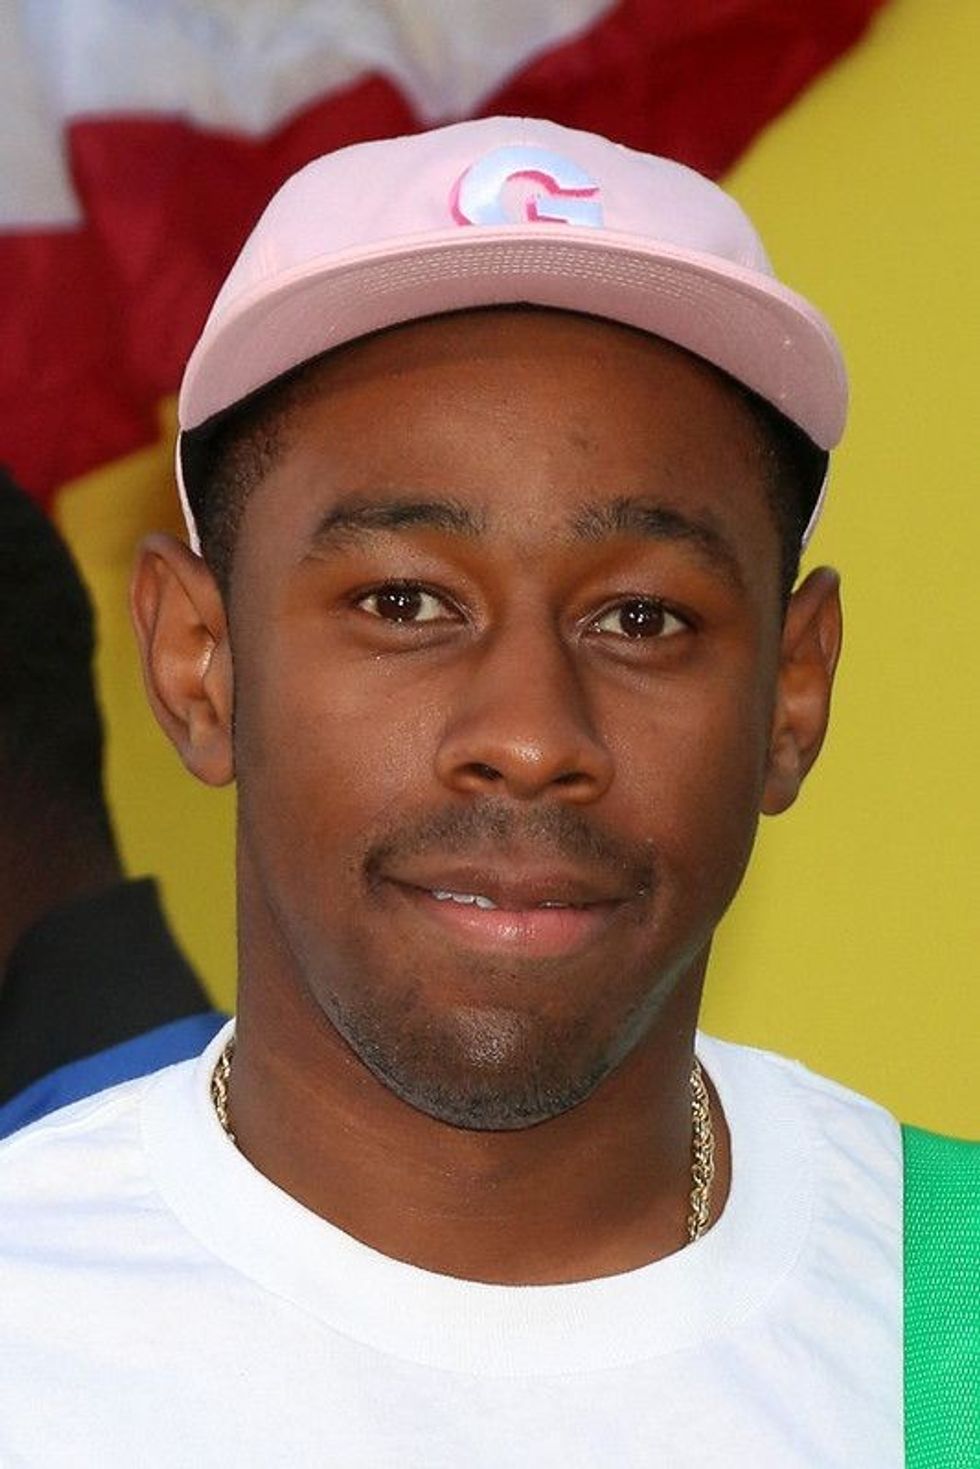 Tyler is the old French word that means 'tile makers'. Check out these Tyler the Creator nicknames